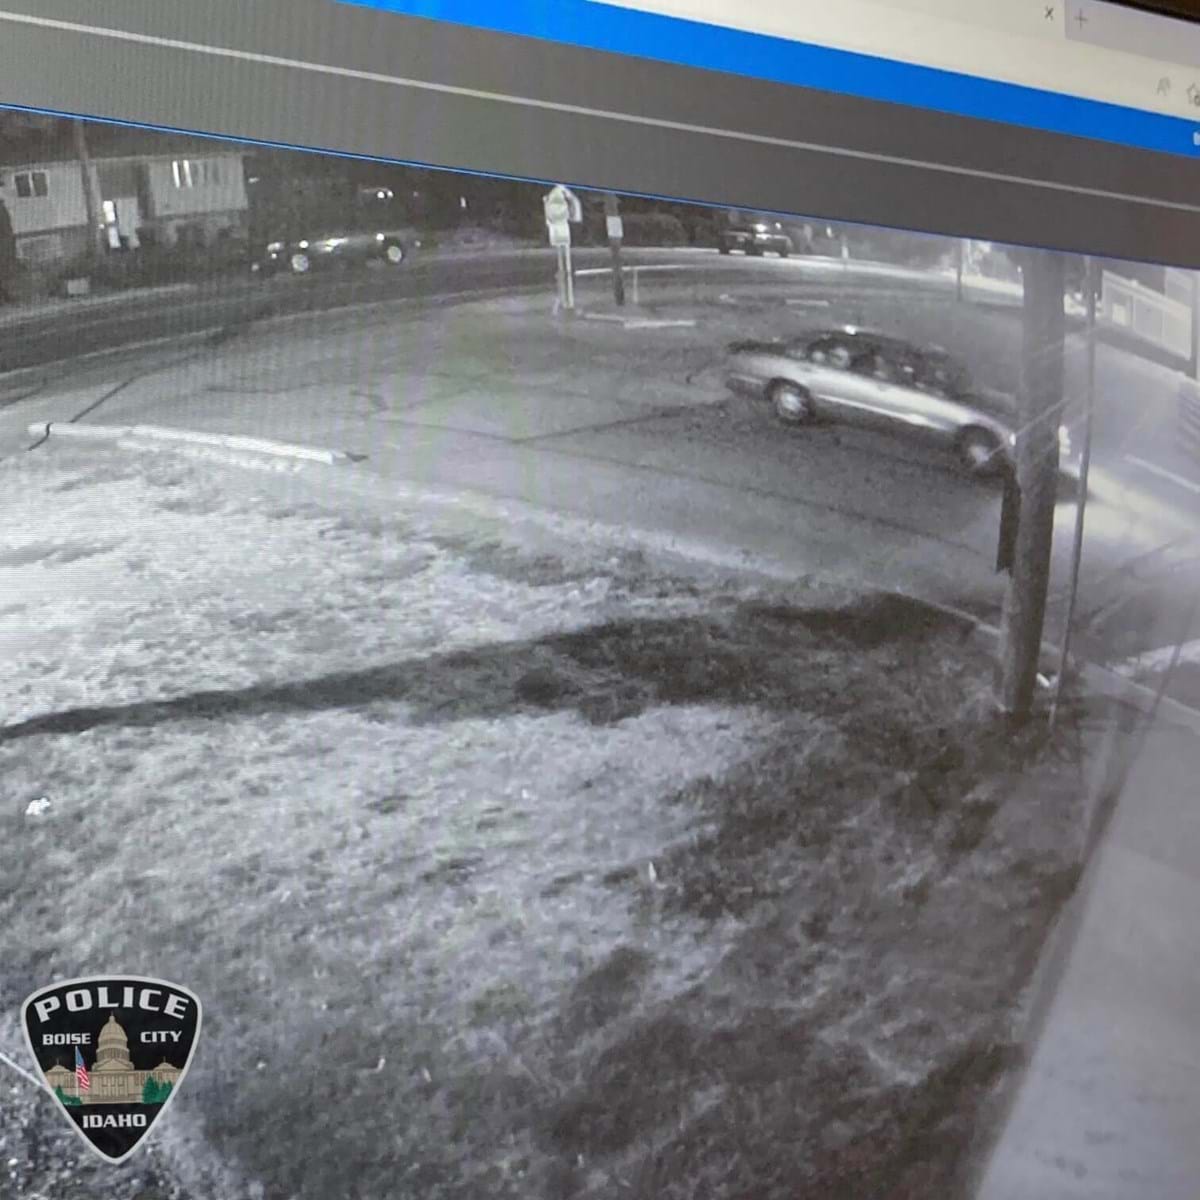 Suspect vehicles: One of the suspect vehicles is described as a dark-colored Chevrolet Avalanche or Honda Ridgeline. The second vehicle looks to be a light-colored, late 90s model sedan.